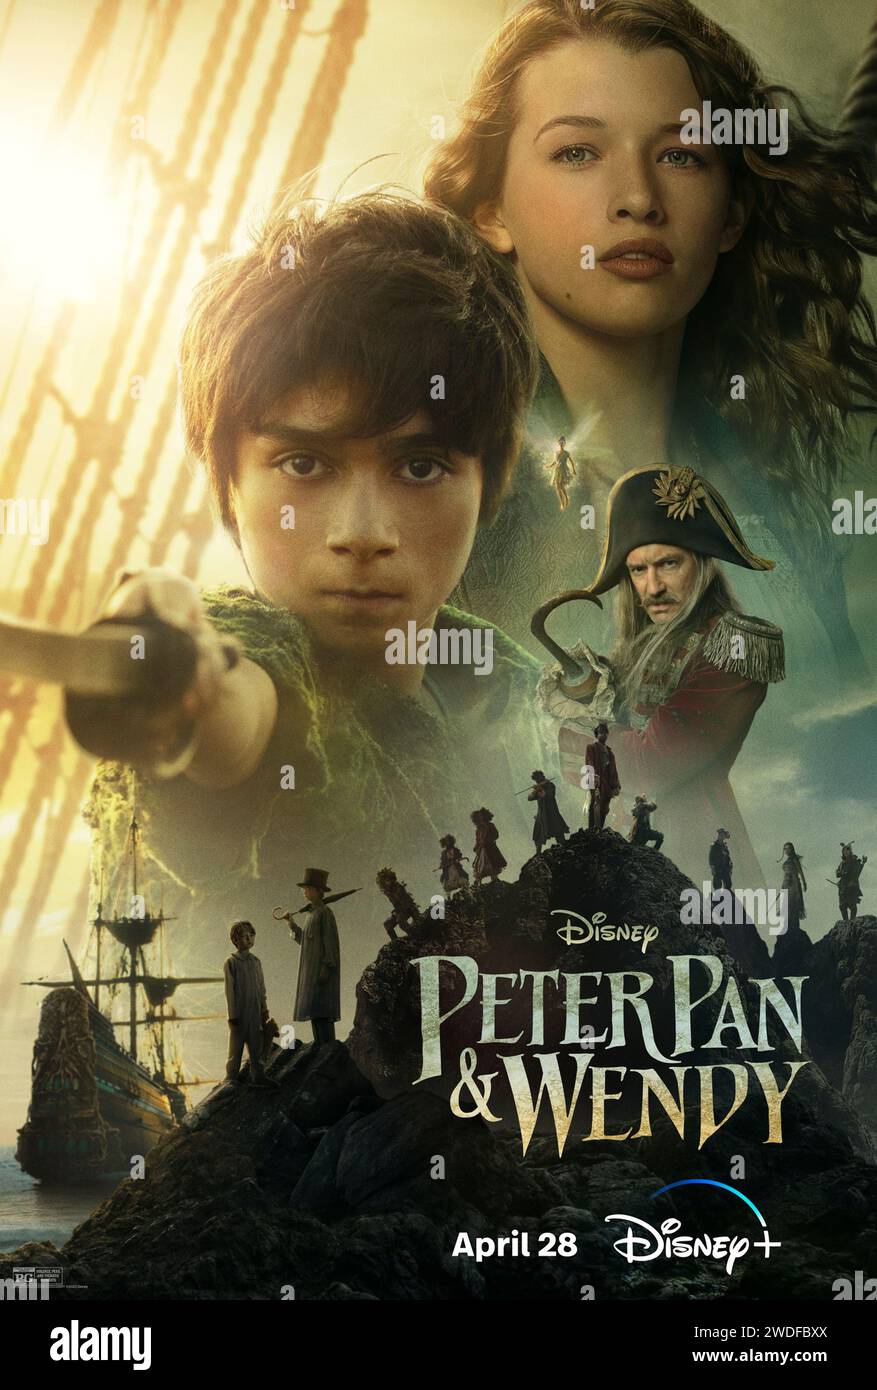 Peter Pan & Wendy (2023) directed by  David Lowery and starring Alexander Molony, Ever Anderson and Jude Law. Follow the adventures of Peter Pan, a boy who does not want to grow up, and how he recruits three siblings in London, and together they embark on a magical adventure on the enchanted island of Neverland. US one sheet poster ***EDITORIAL USE ONLY***. Credit: BFA / Walt Disney Studios Stock Photo